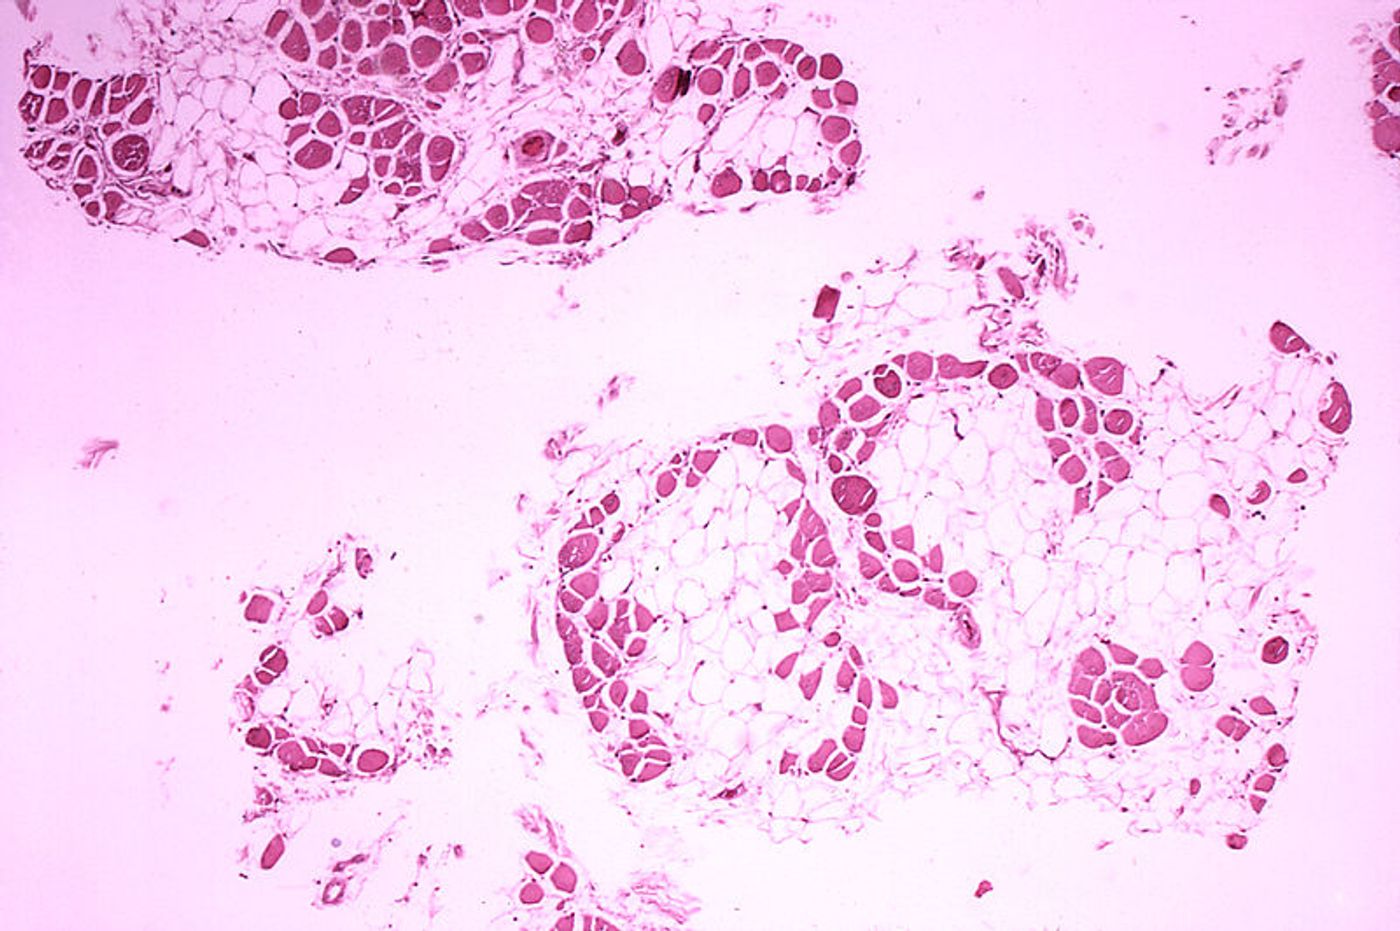 Histopathology of gastrocnemius muscle from patient who died of Duchenne muscular dystrophy. Muscle shows extensive replacement of muscle fibers by adipose cells. Credit: CDC Public Health Image Library